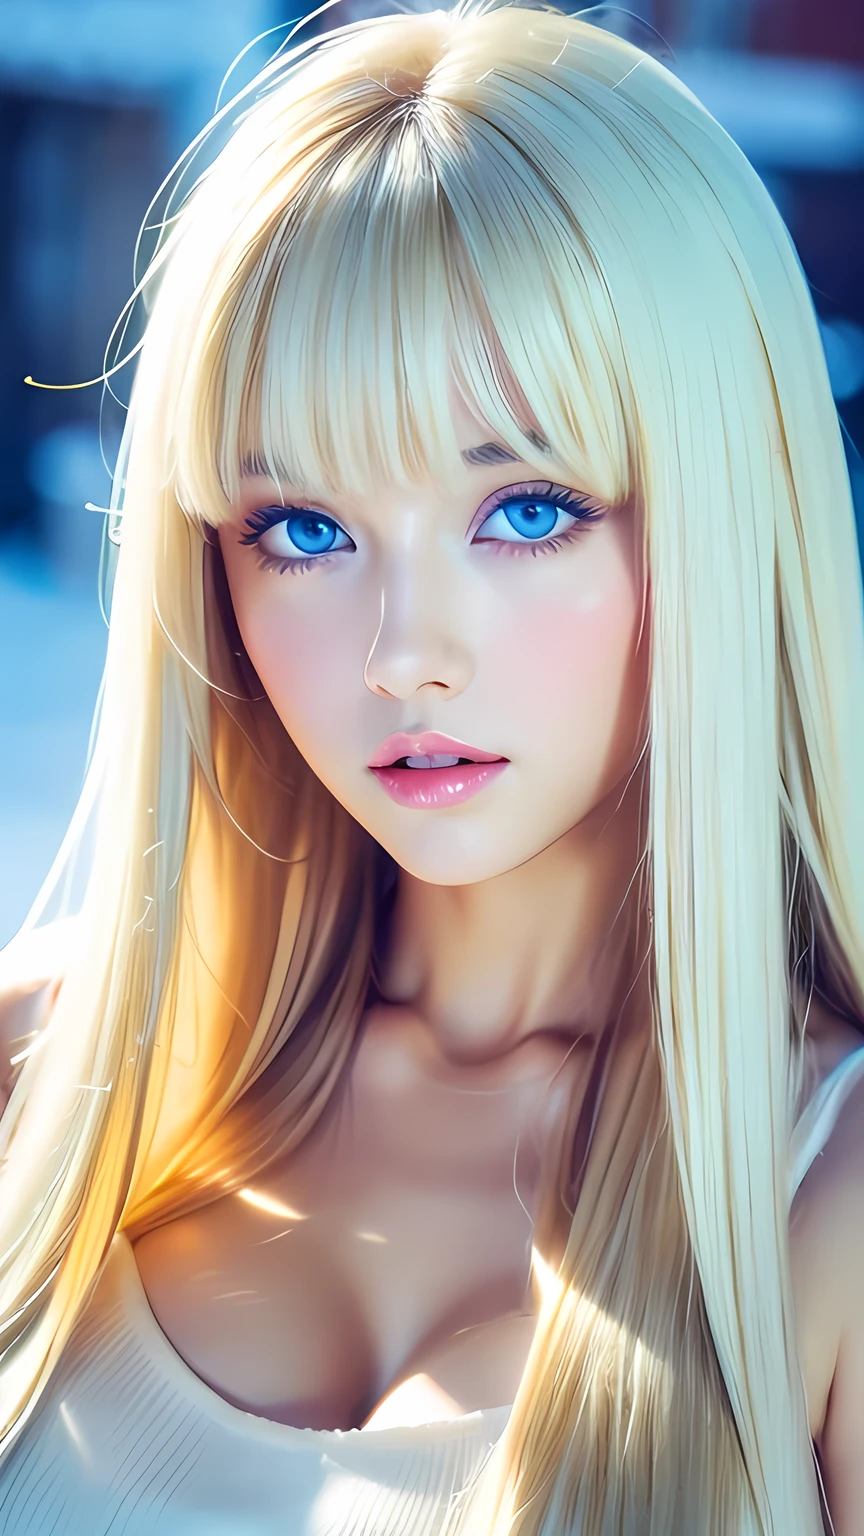 Analogue style portrait of a cute very beautiful young woman with the most beautiful bright blonde super long straight hair in the world、Her messy bangs hang down between her eyes and nose.、Beautiful, Large, shining, pale, bright blue eyes、Snow-white skin、Glowing Skin、